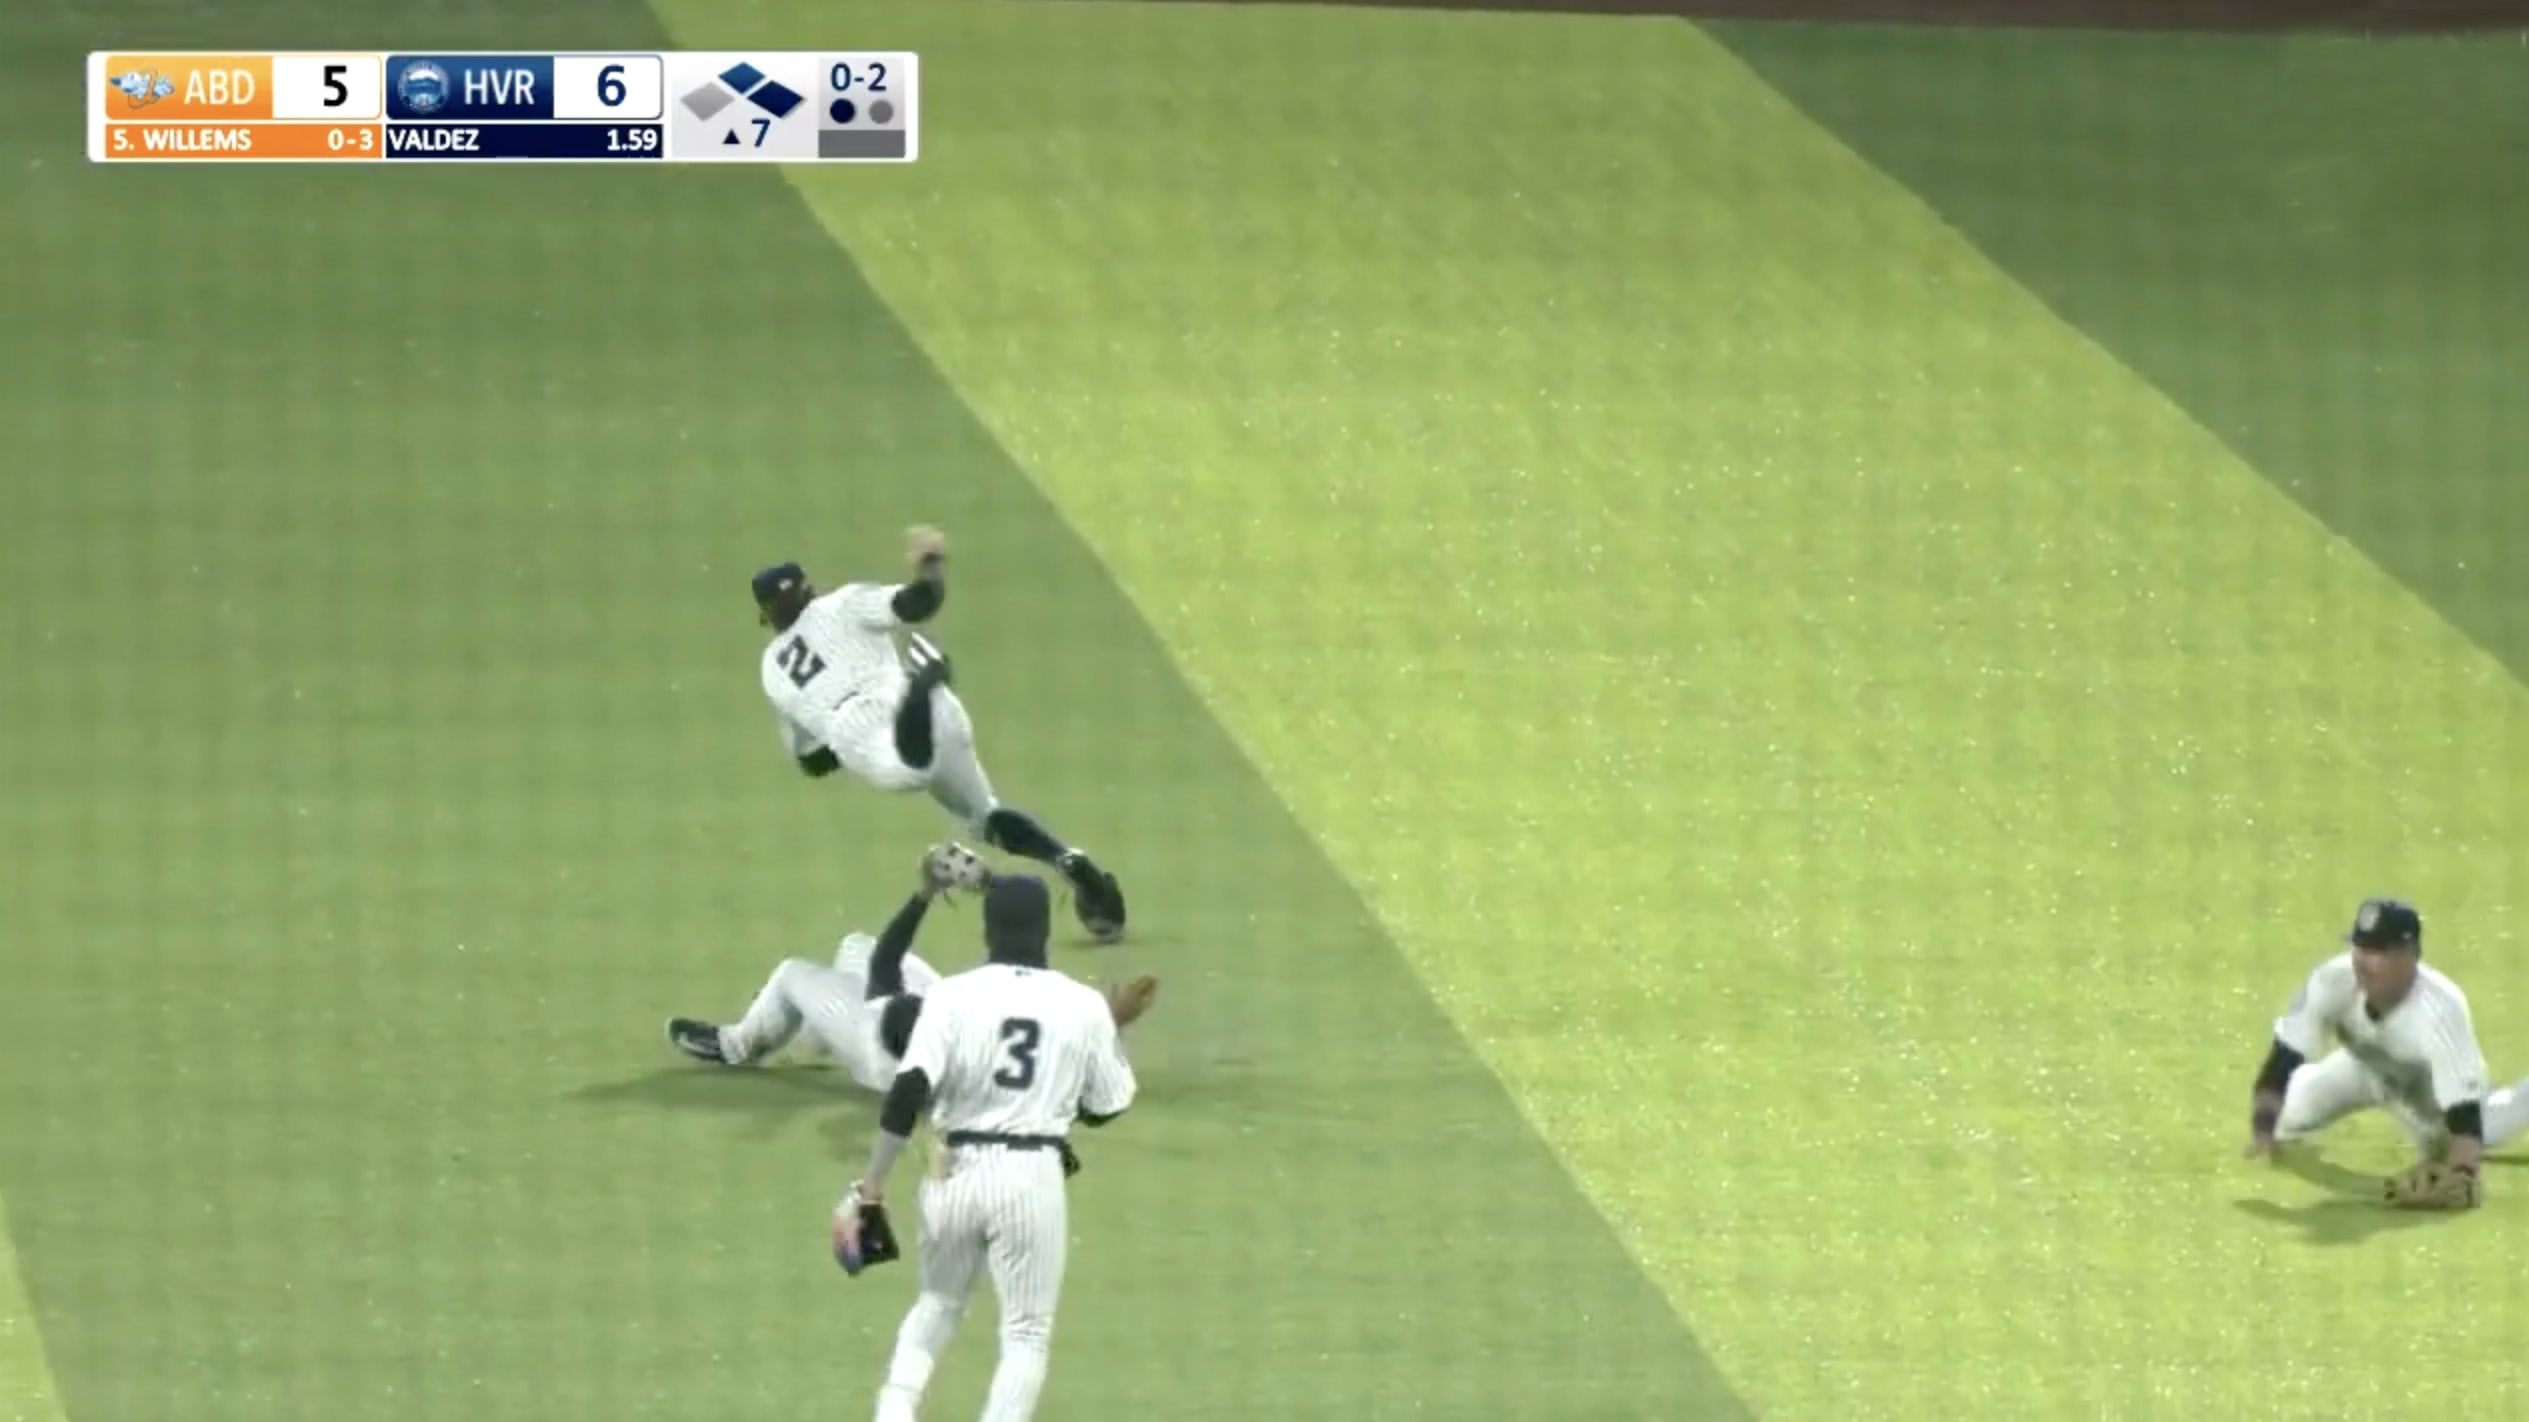 Screenshot from video of Roc Riggio making a diving catch